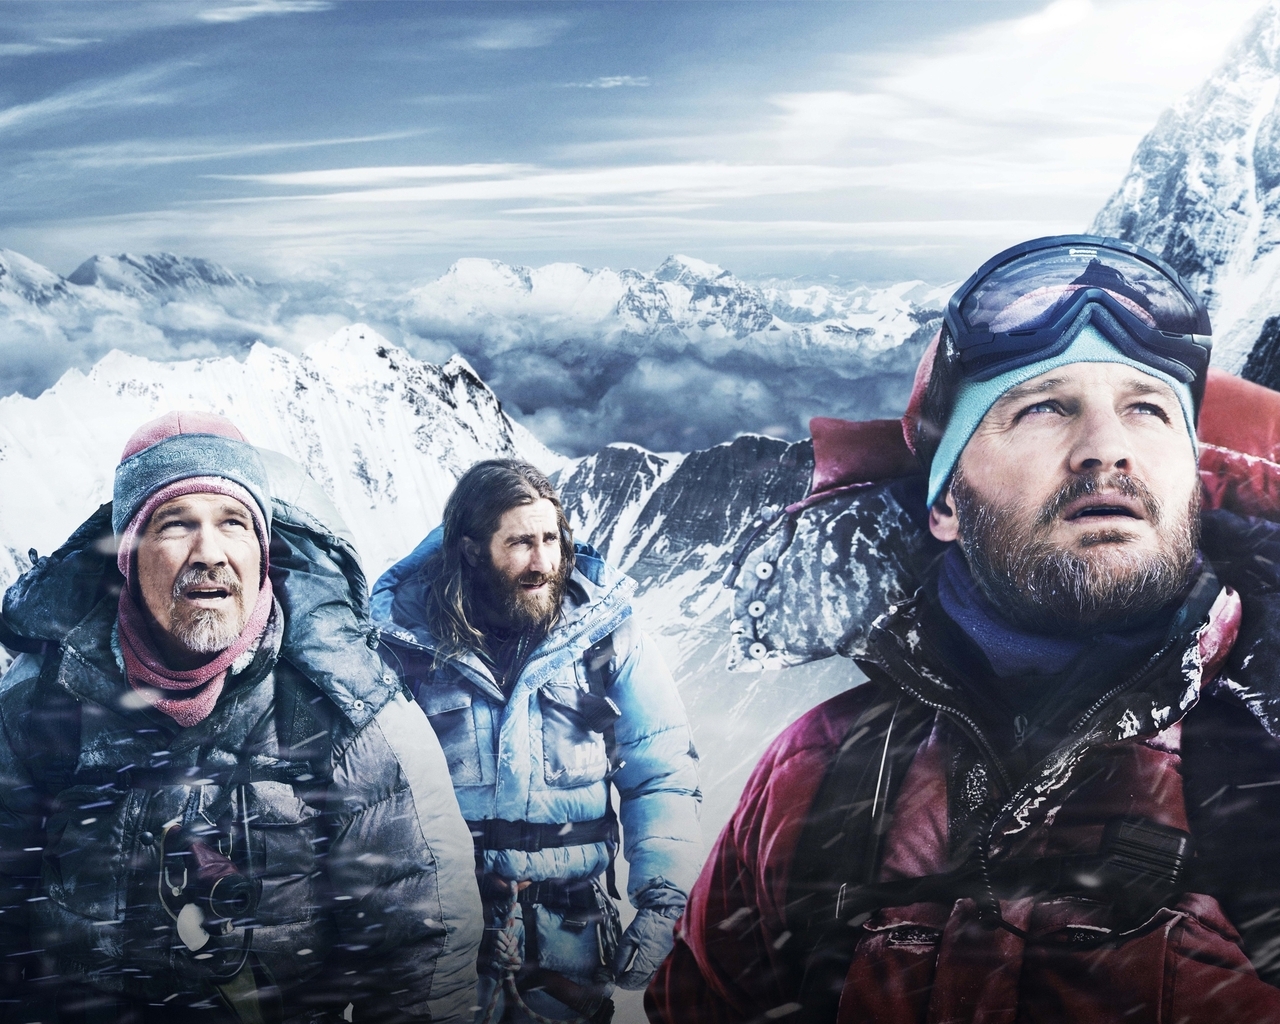 Everest Movie Poster for 1280 x 1024 resolution